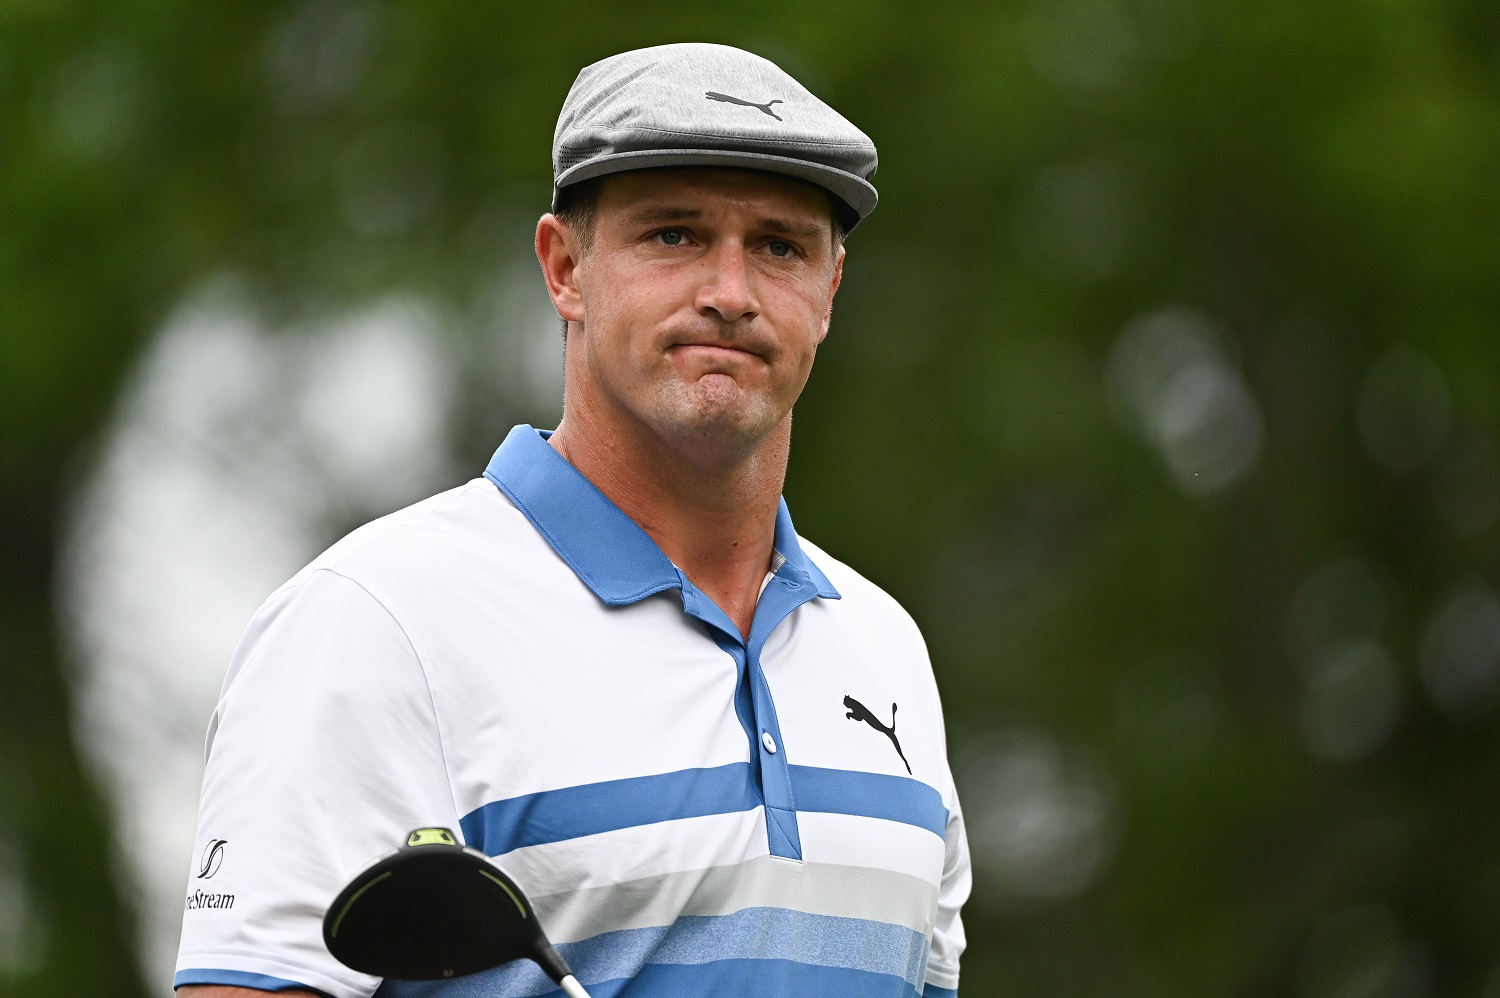 Hearing fans call out "Brooksy" has become a major irritant to Bryson DeChambeau this week at the Memorial Tournament, where several fans have been removed from the course. | Ben Jared/PGA Tour via Getty Images